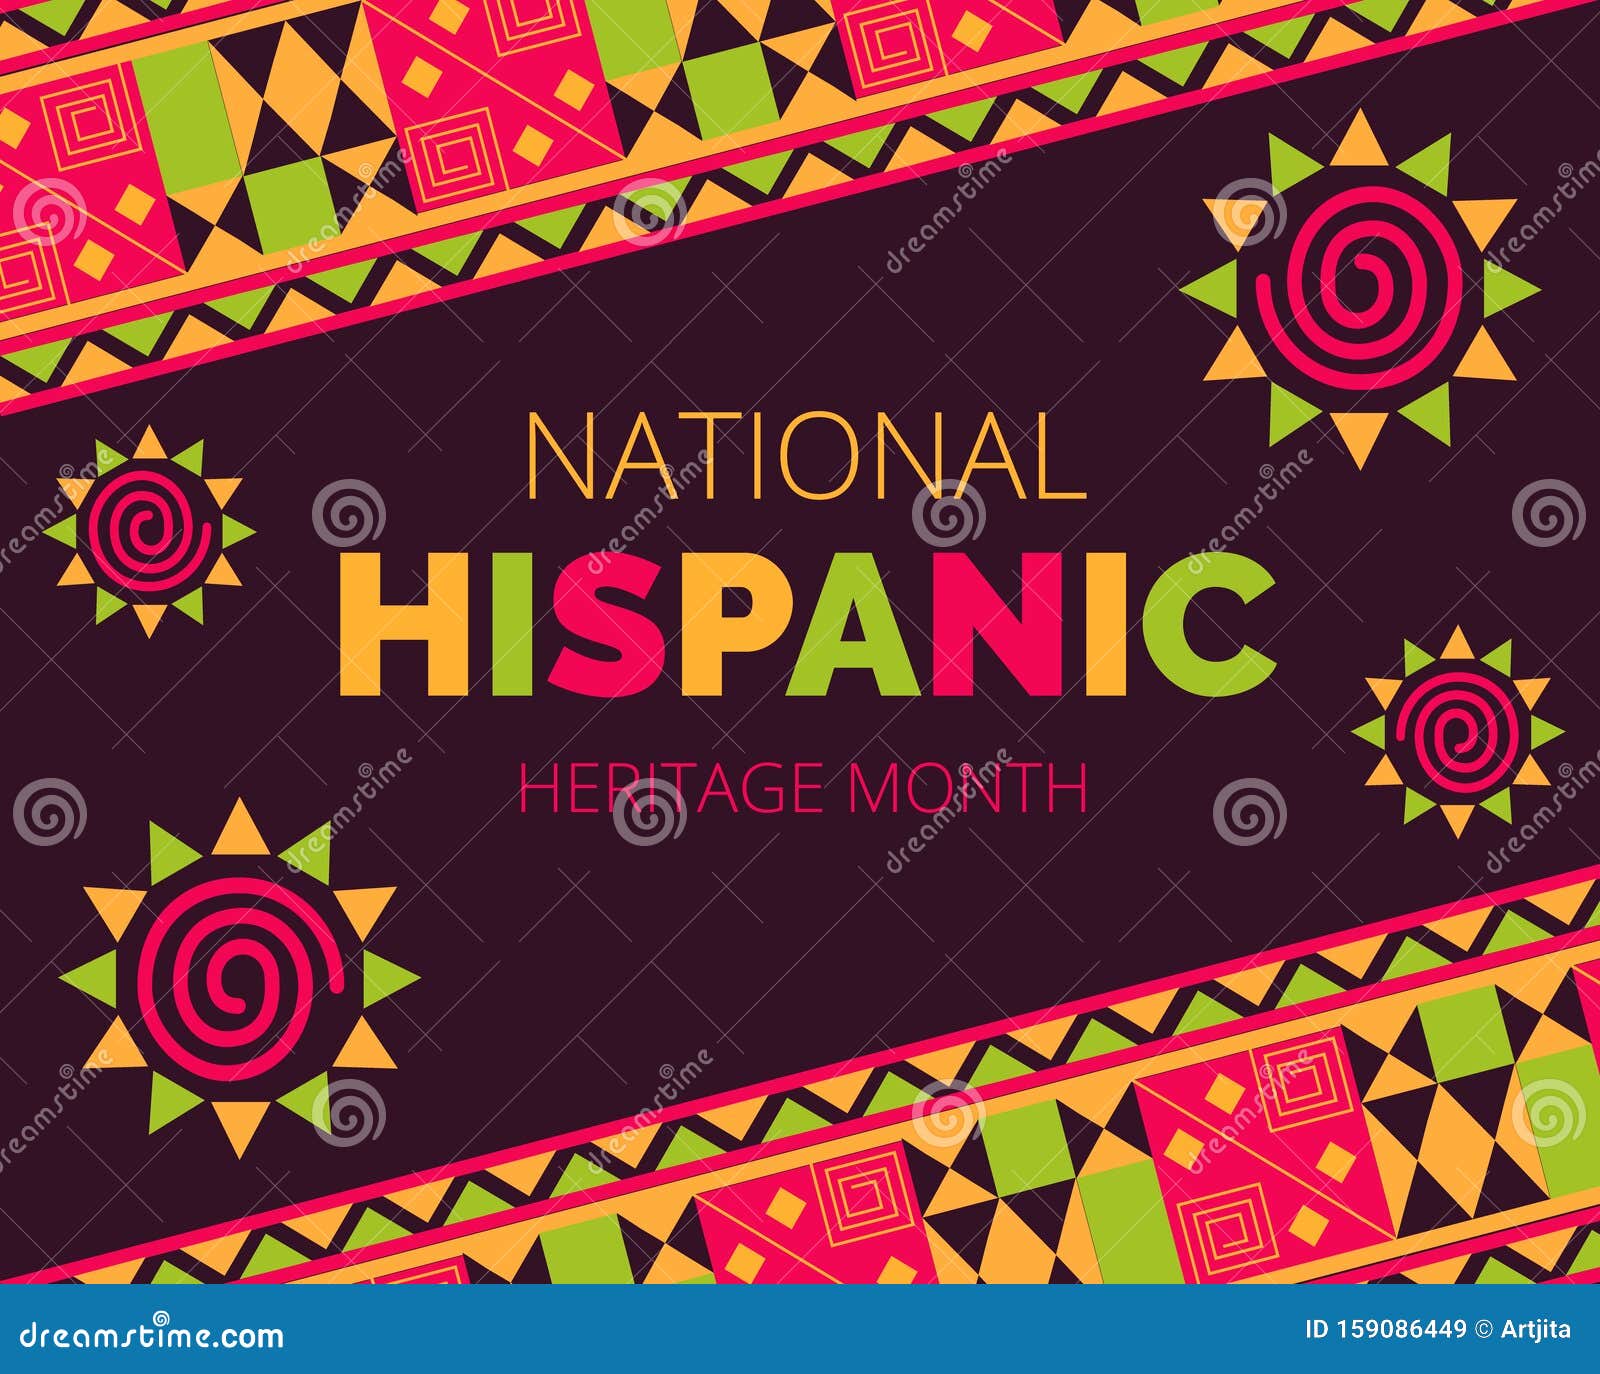 national hispanic heritage month celebrated from 15 september to 15 october usa.